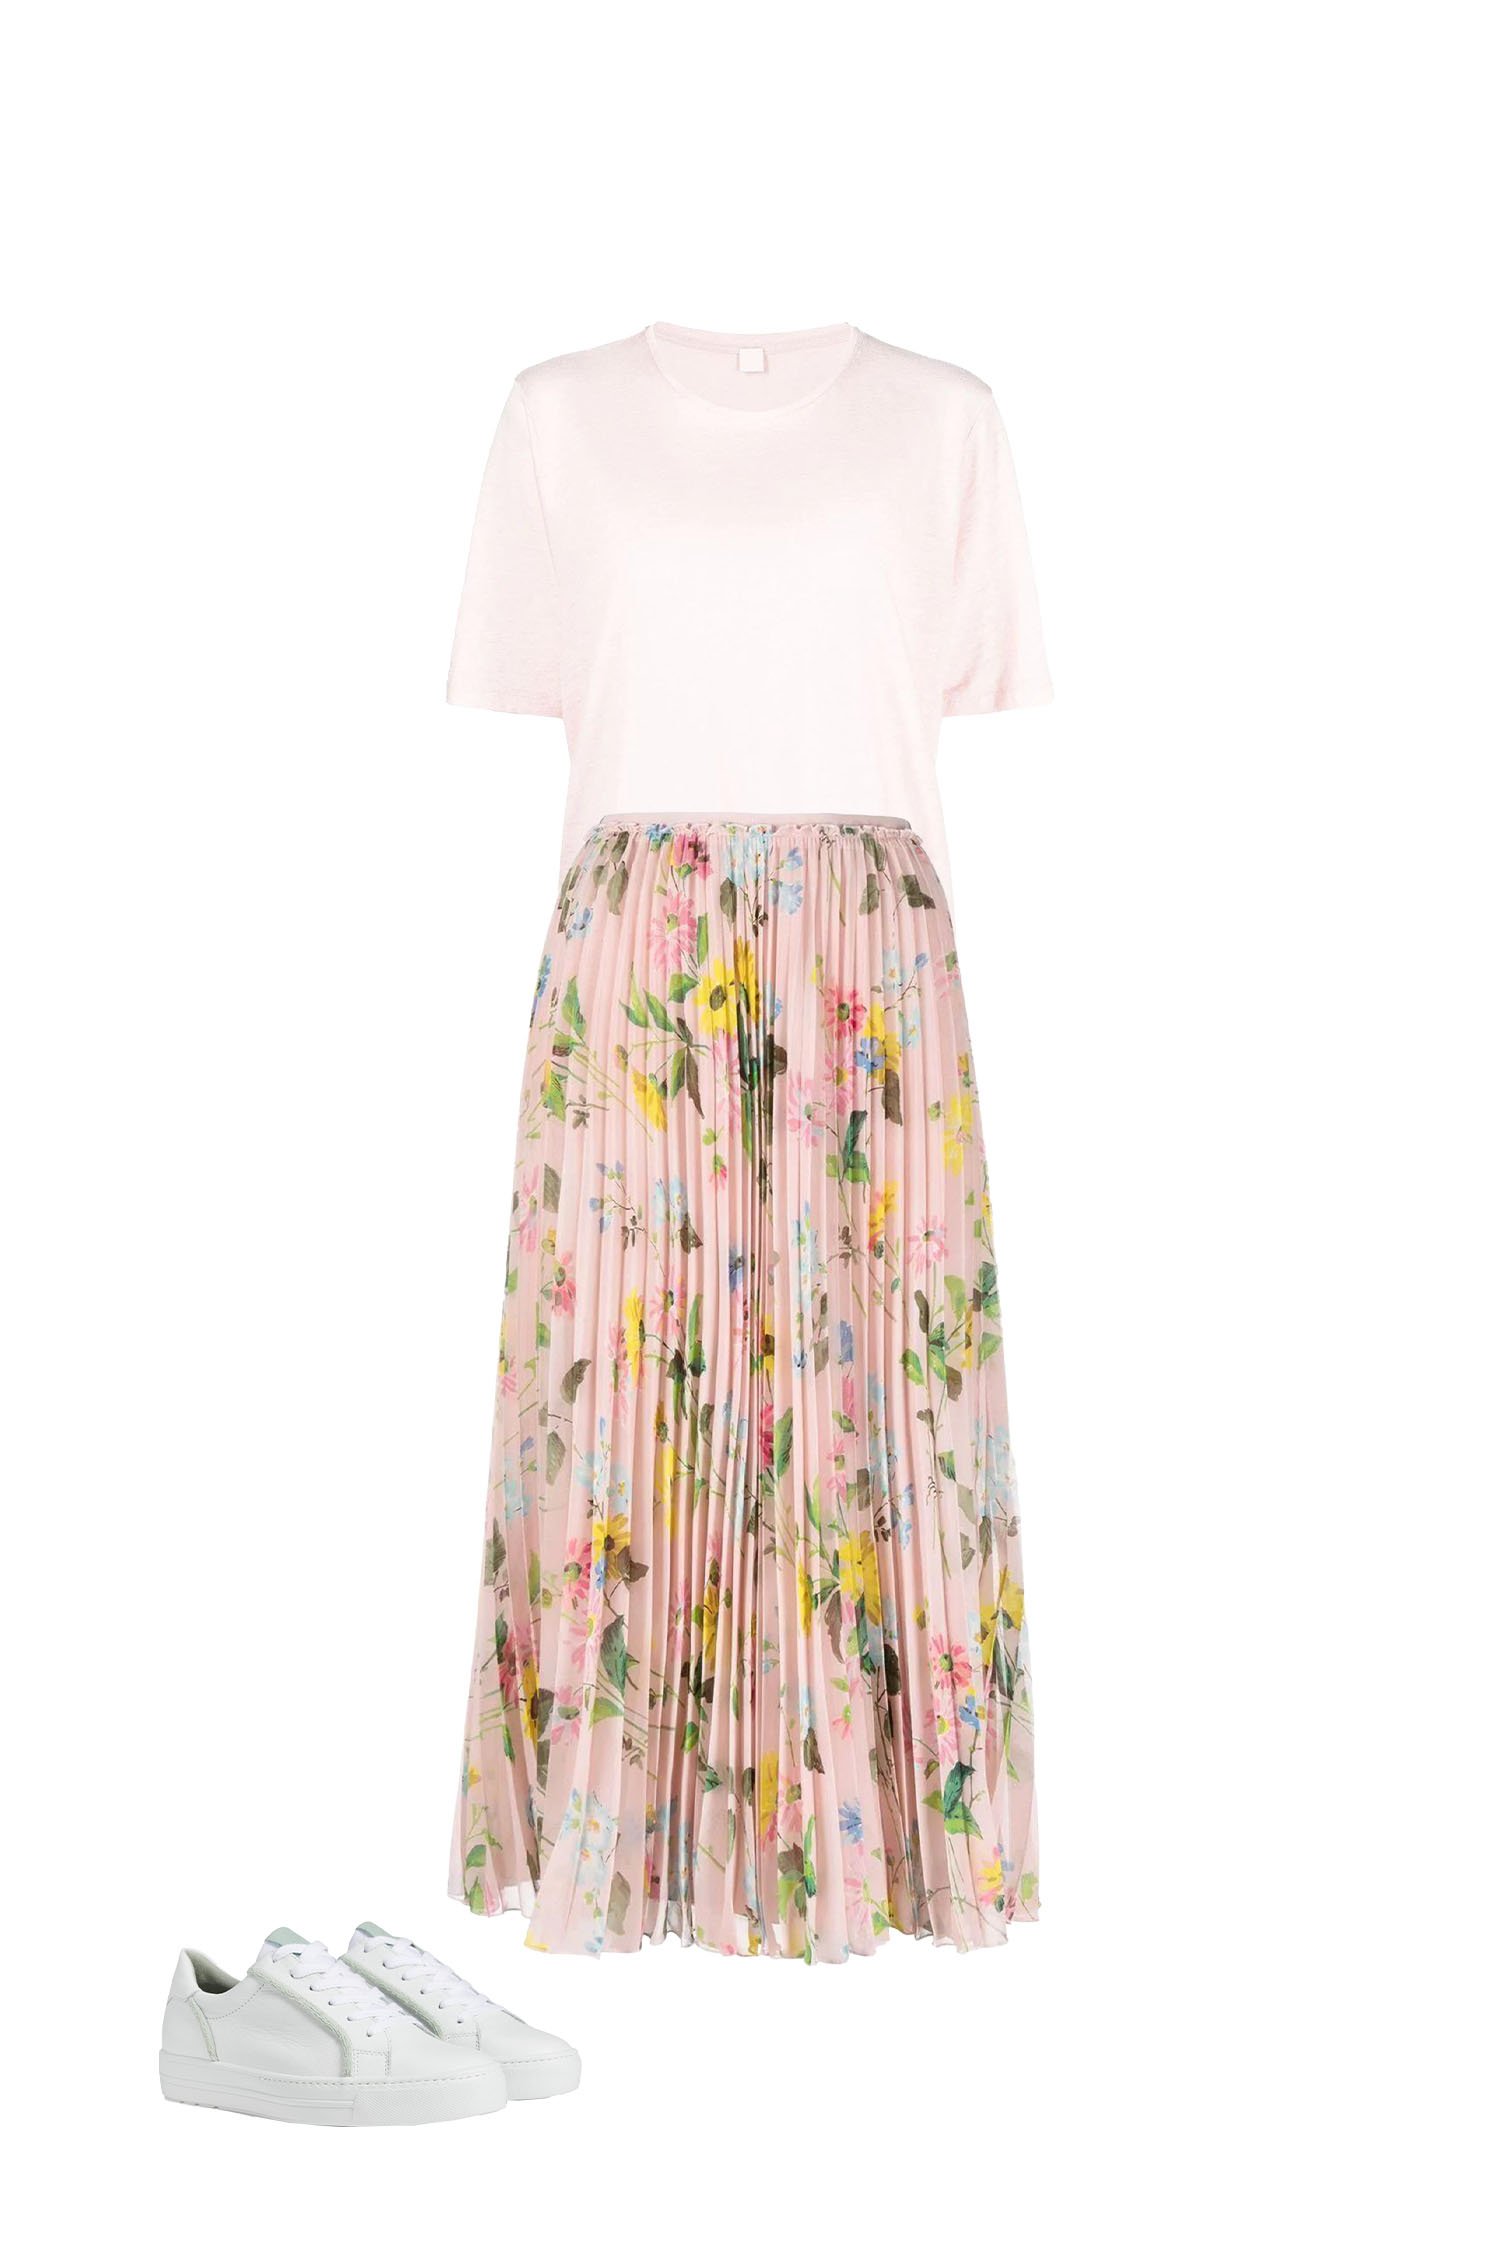 Pink Floral Pleated Skirt with Light Pink T-Shirt Outfit